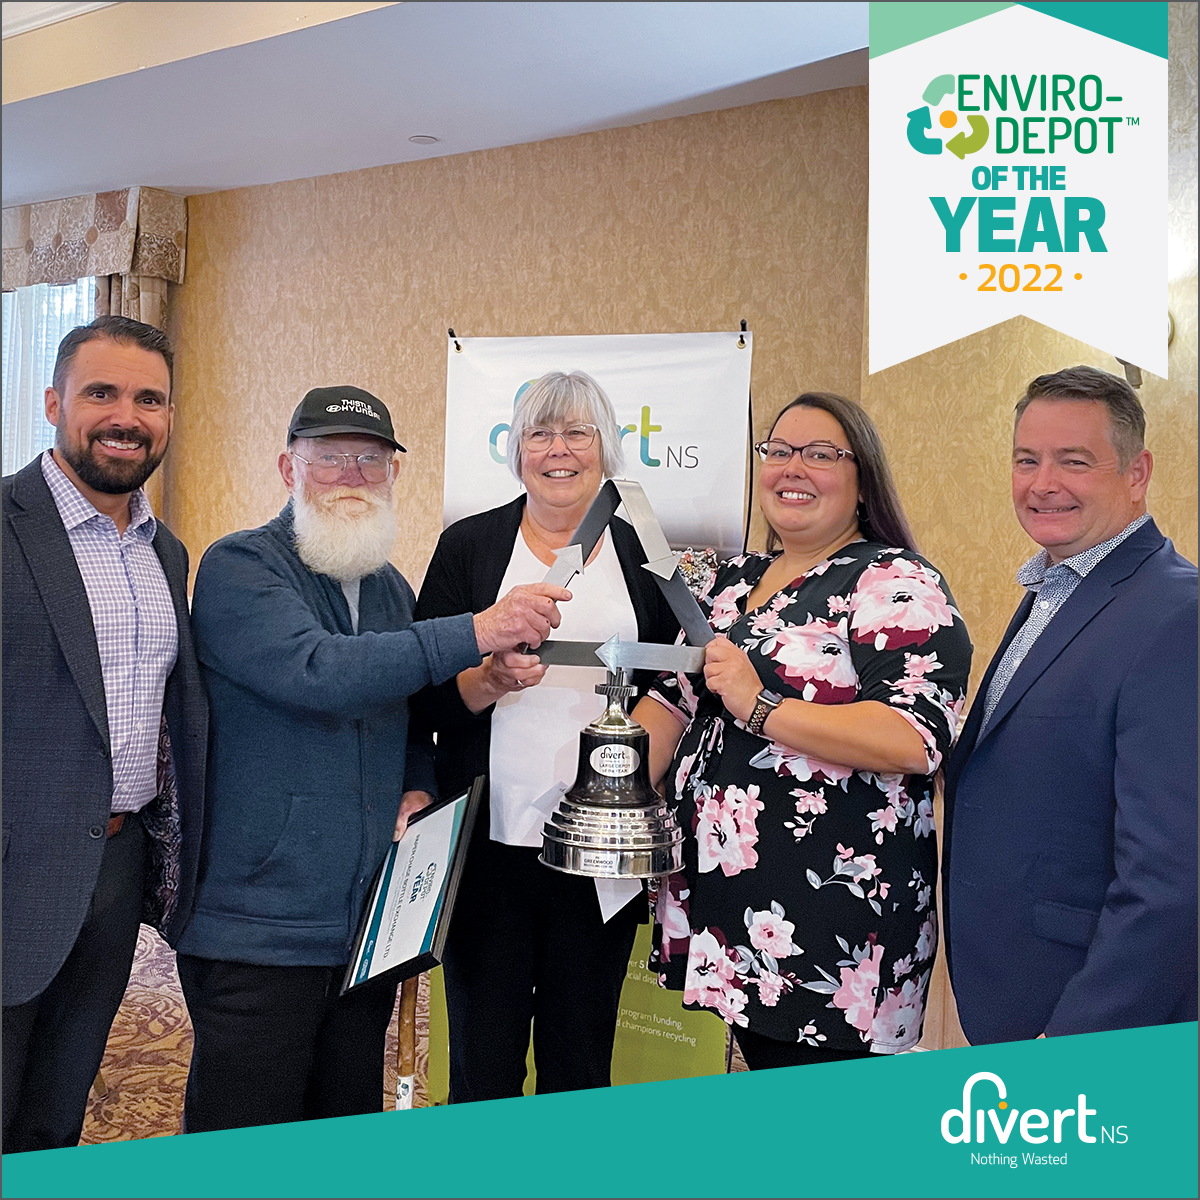 Divert NS is proud to celebrate this year’s 2022 Large Depot of the Year Award winner, Paper Chase Bottle Exchange Ltd.! Thank you for going the extra mile to make recycling a positive experience for everyone.